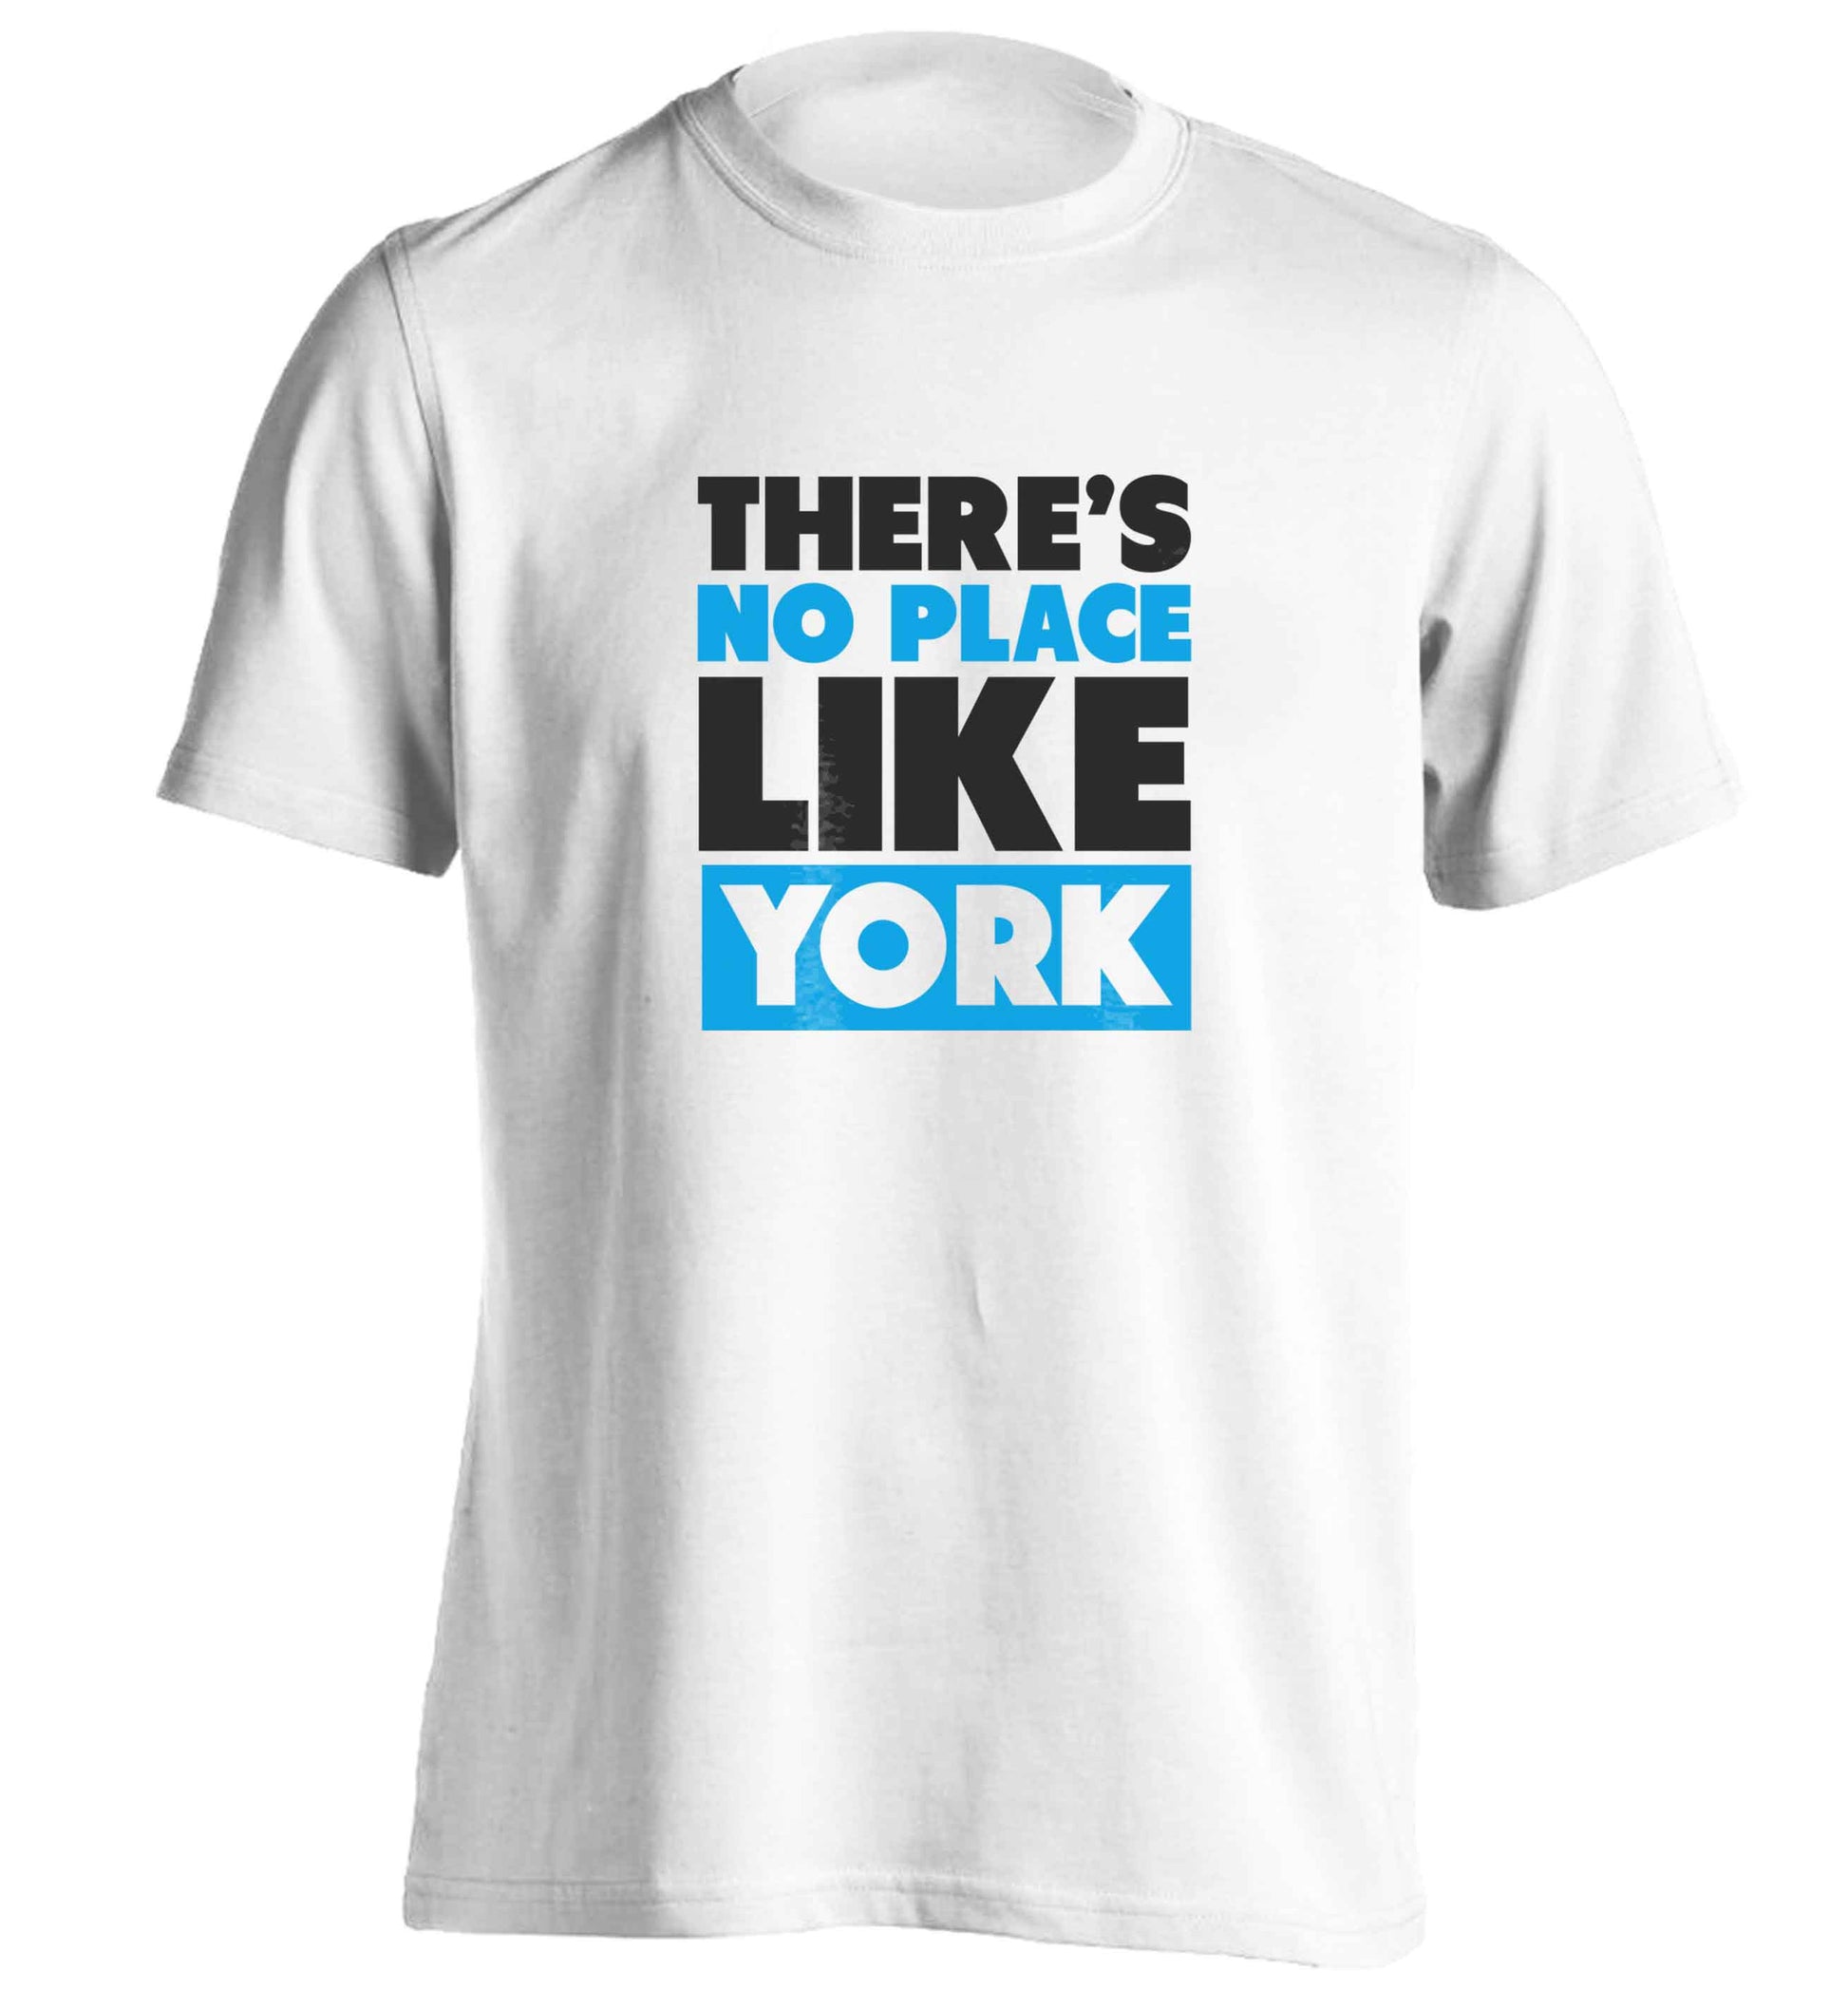 There's no place like york adults unisex white Tshirt 2XL